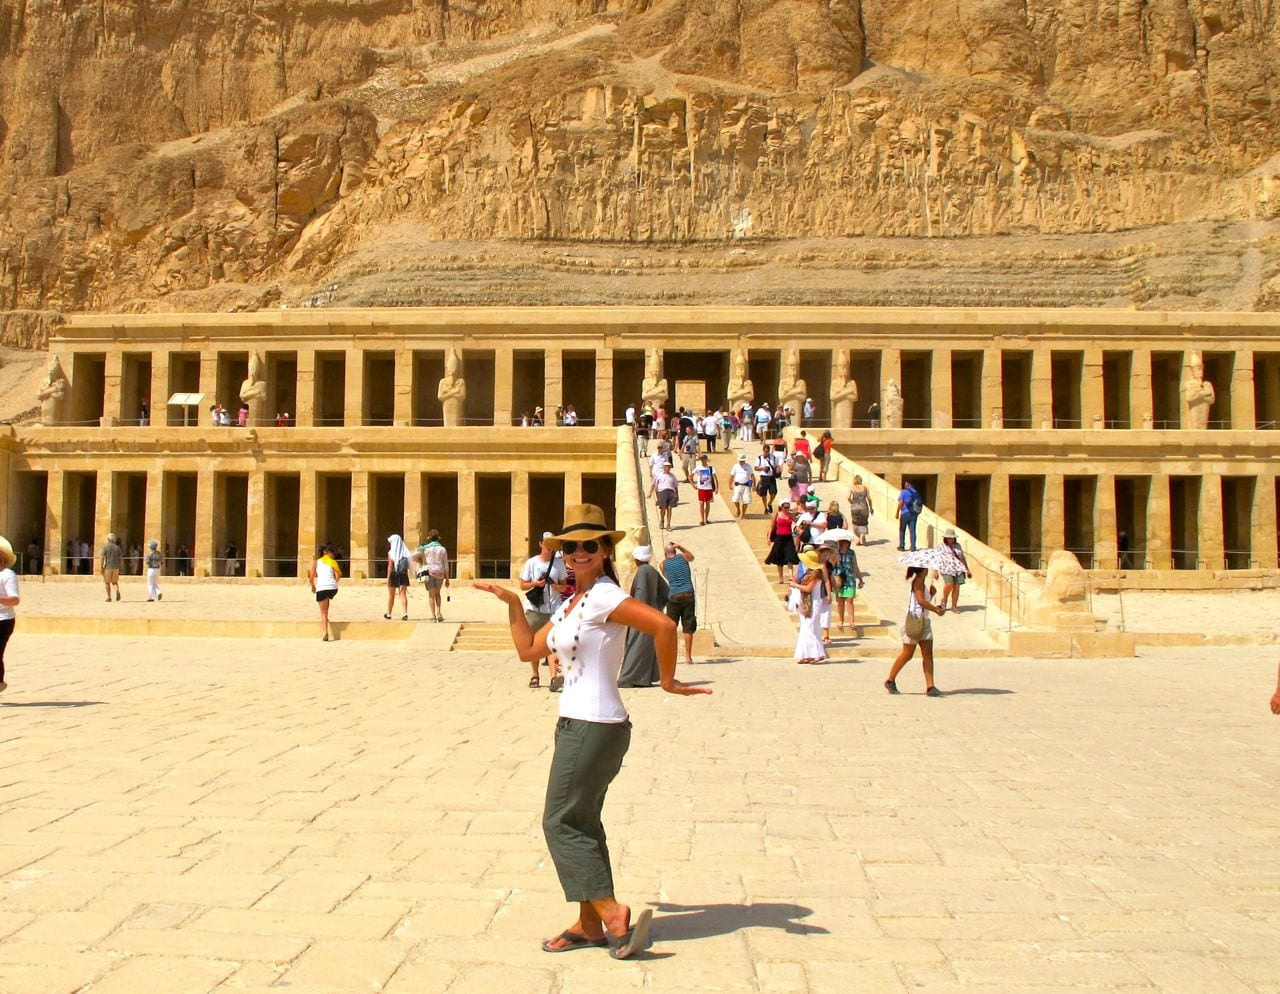 Luxor and Abu Simbel two days tour from El Gouna